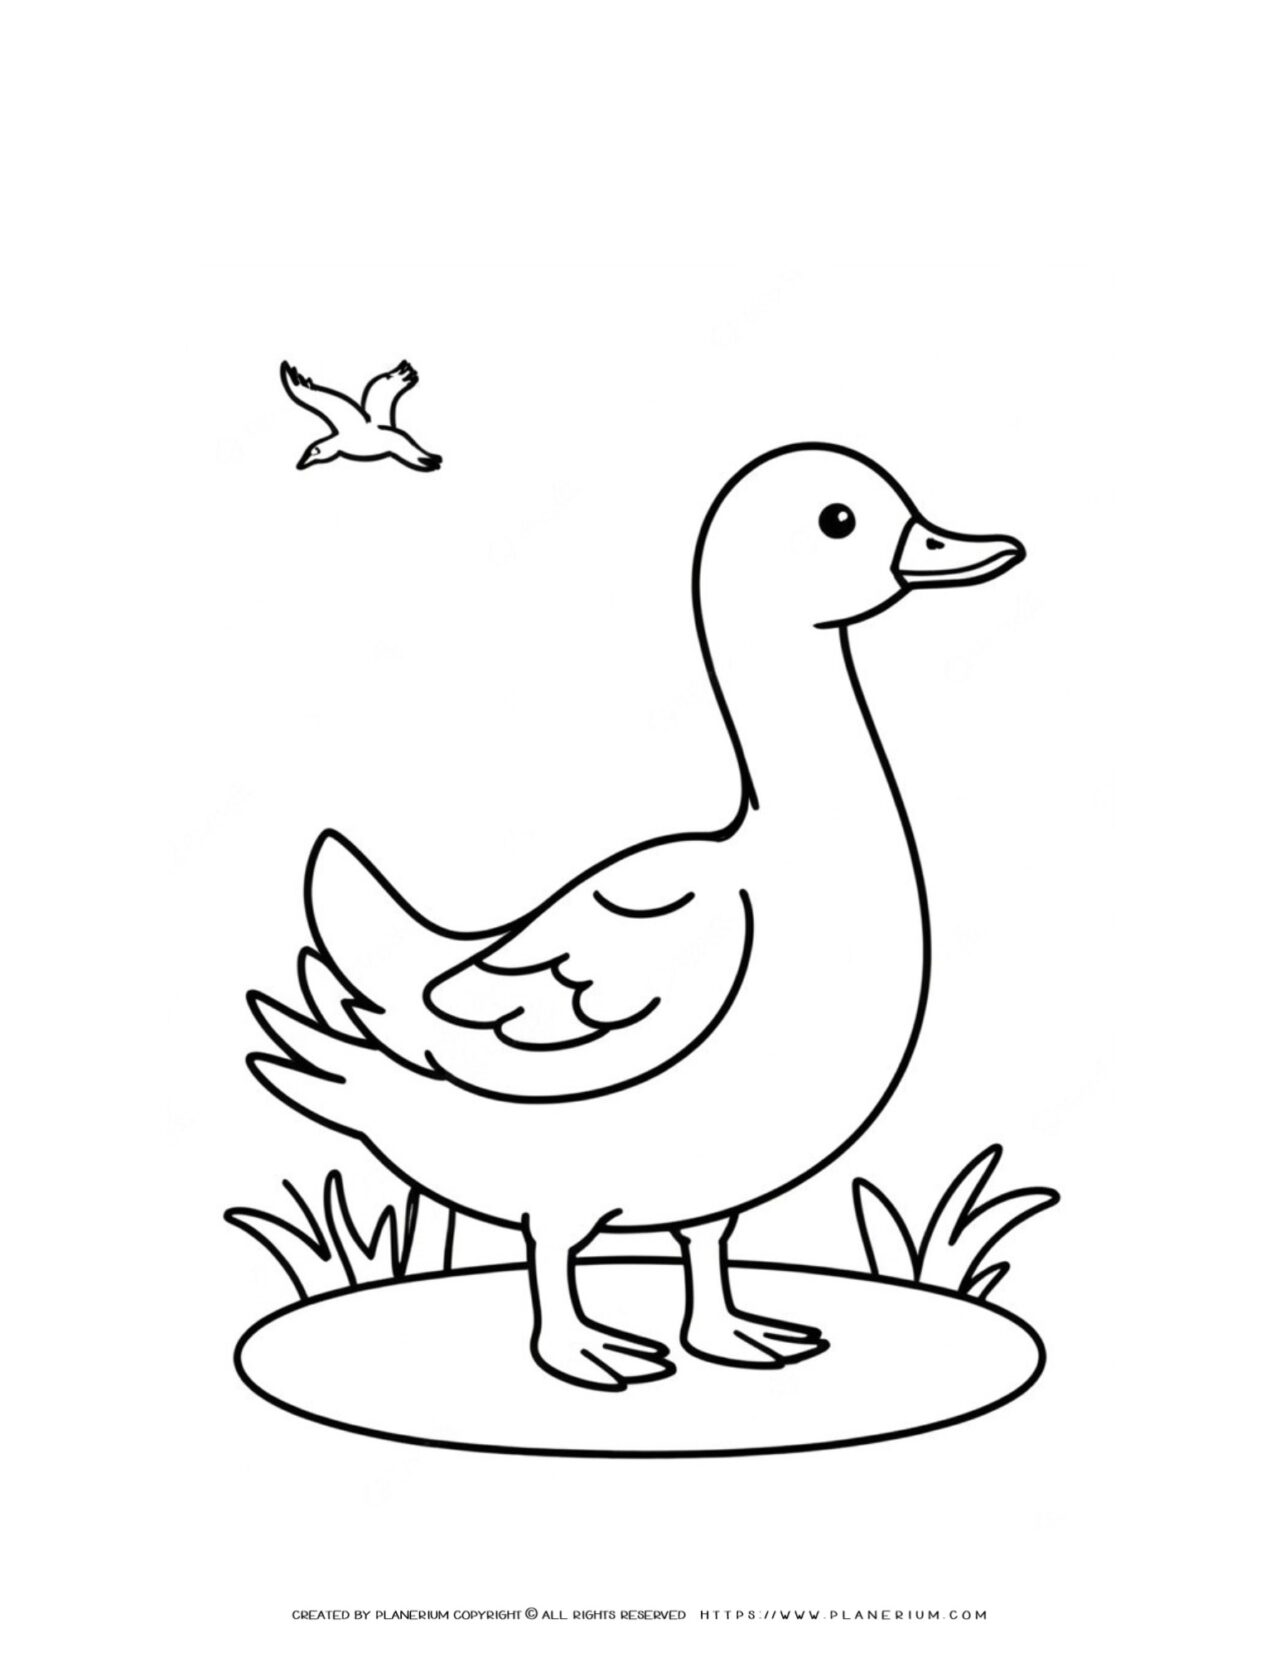 goose-simple-animal-coloring-page-for-kids